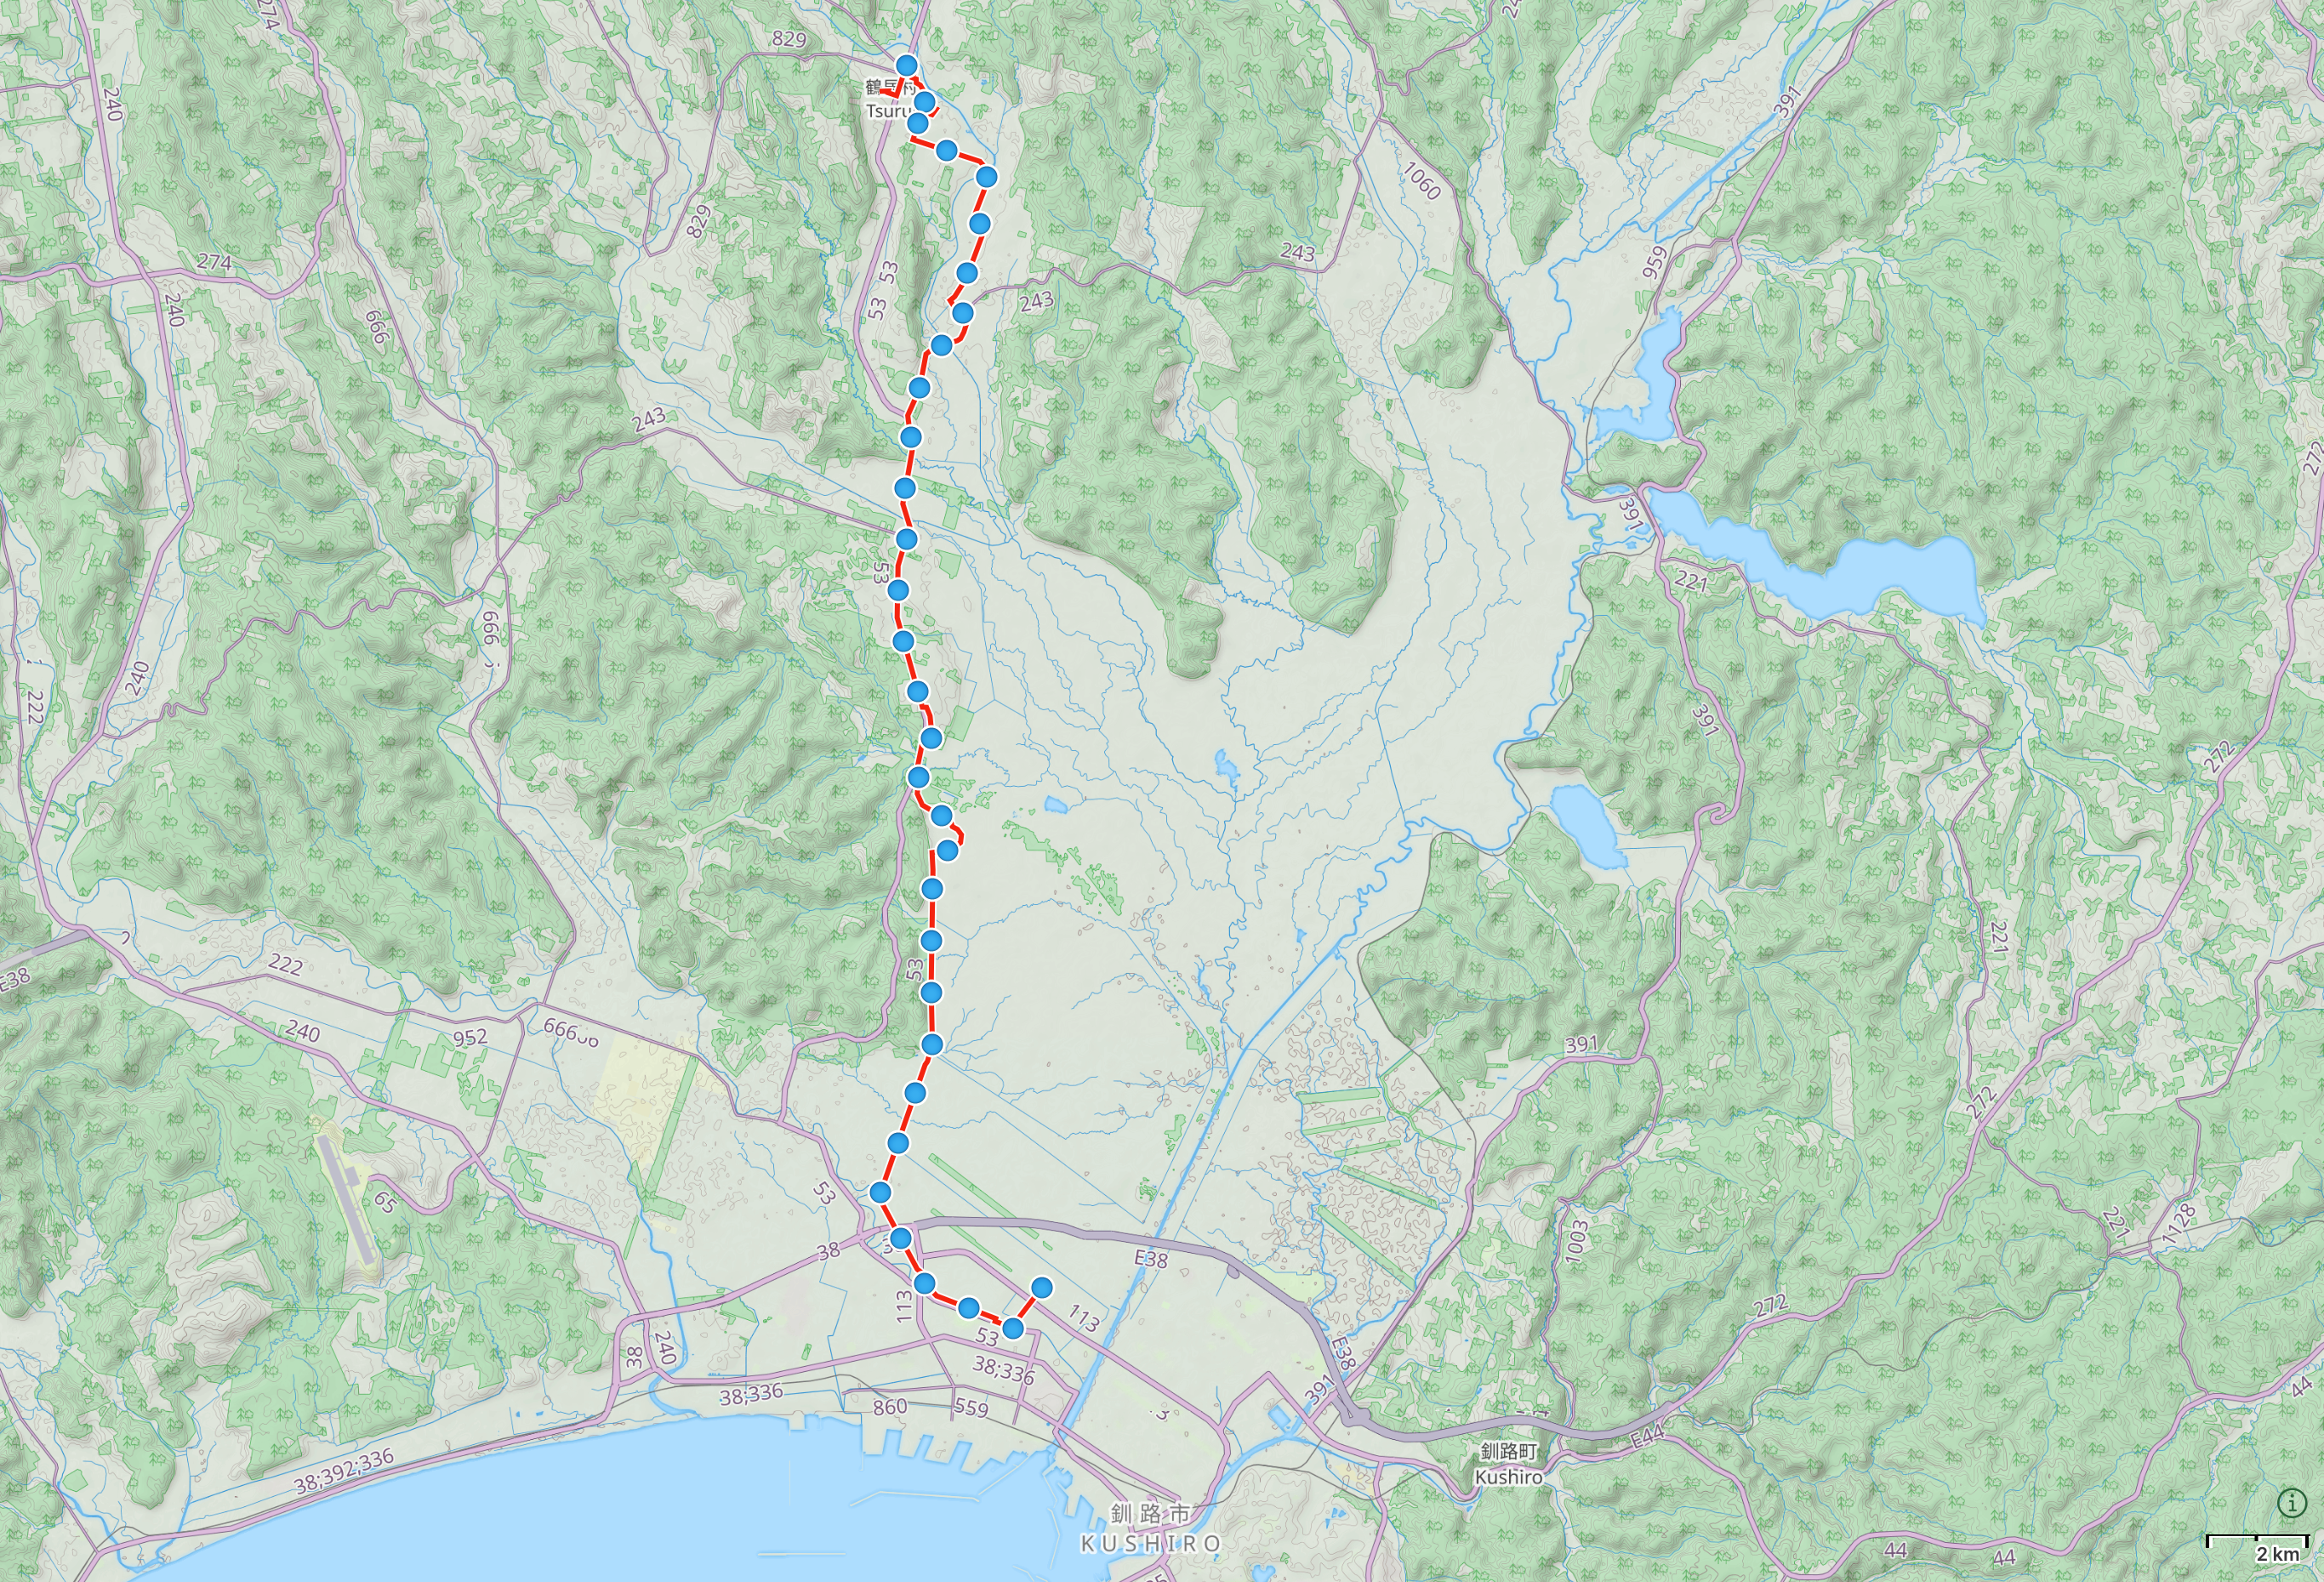 Map of Hokkaido with author’s route from Tsurui to Kushiro highlighted.